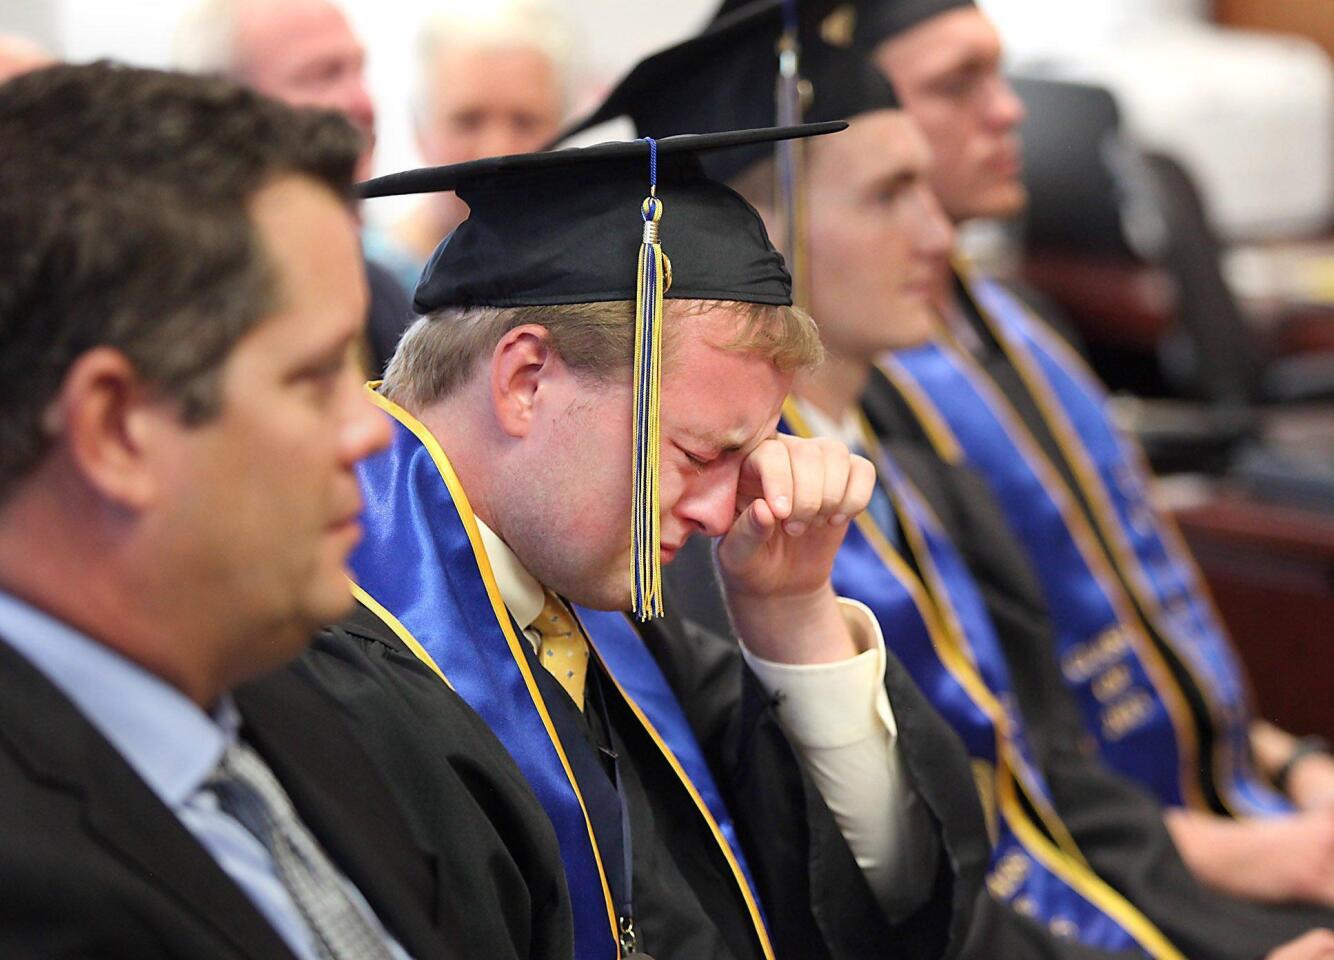 Graduate Christopher Swieca tears up at s the surprise commencement ceremony in his honor in the Chancellor's office at UCI on Tuesday. Swieca could not attend his commencement with his fellow water polo players due to an eye surgery.